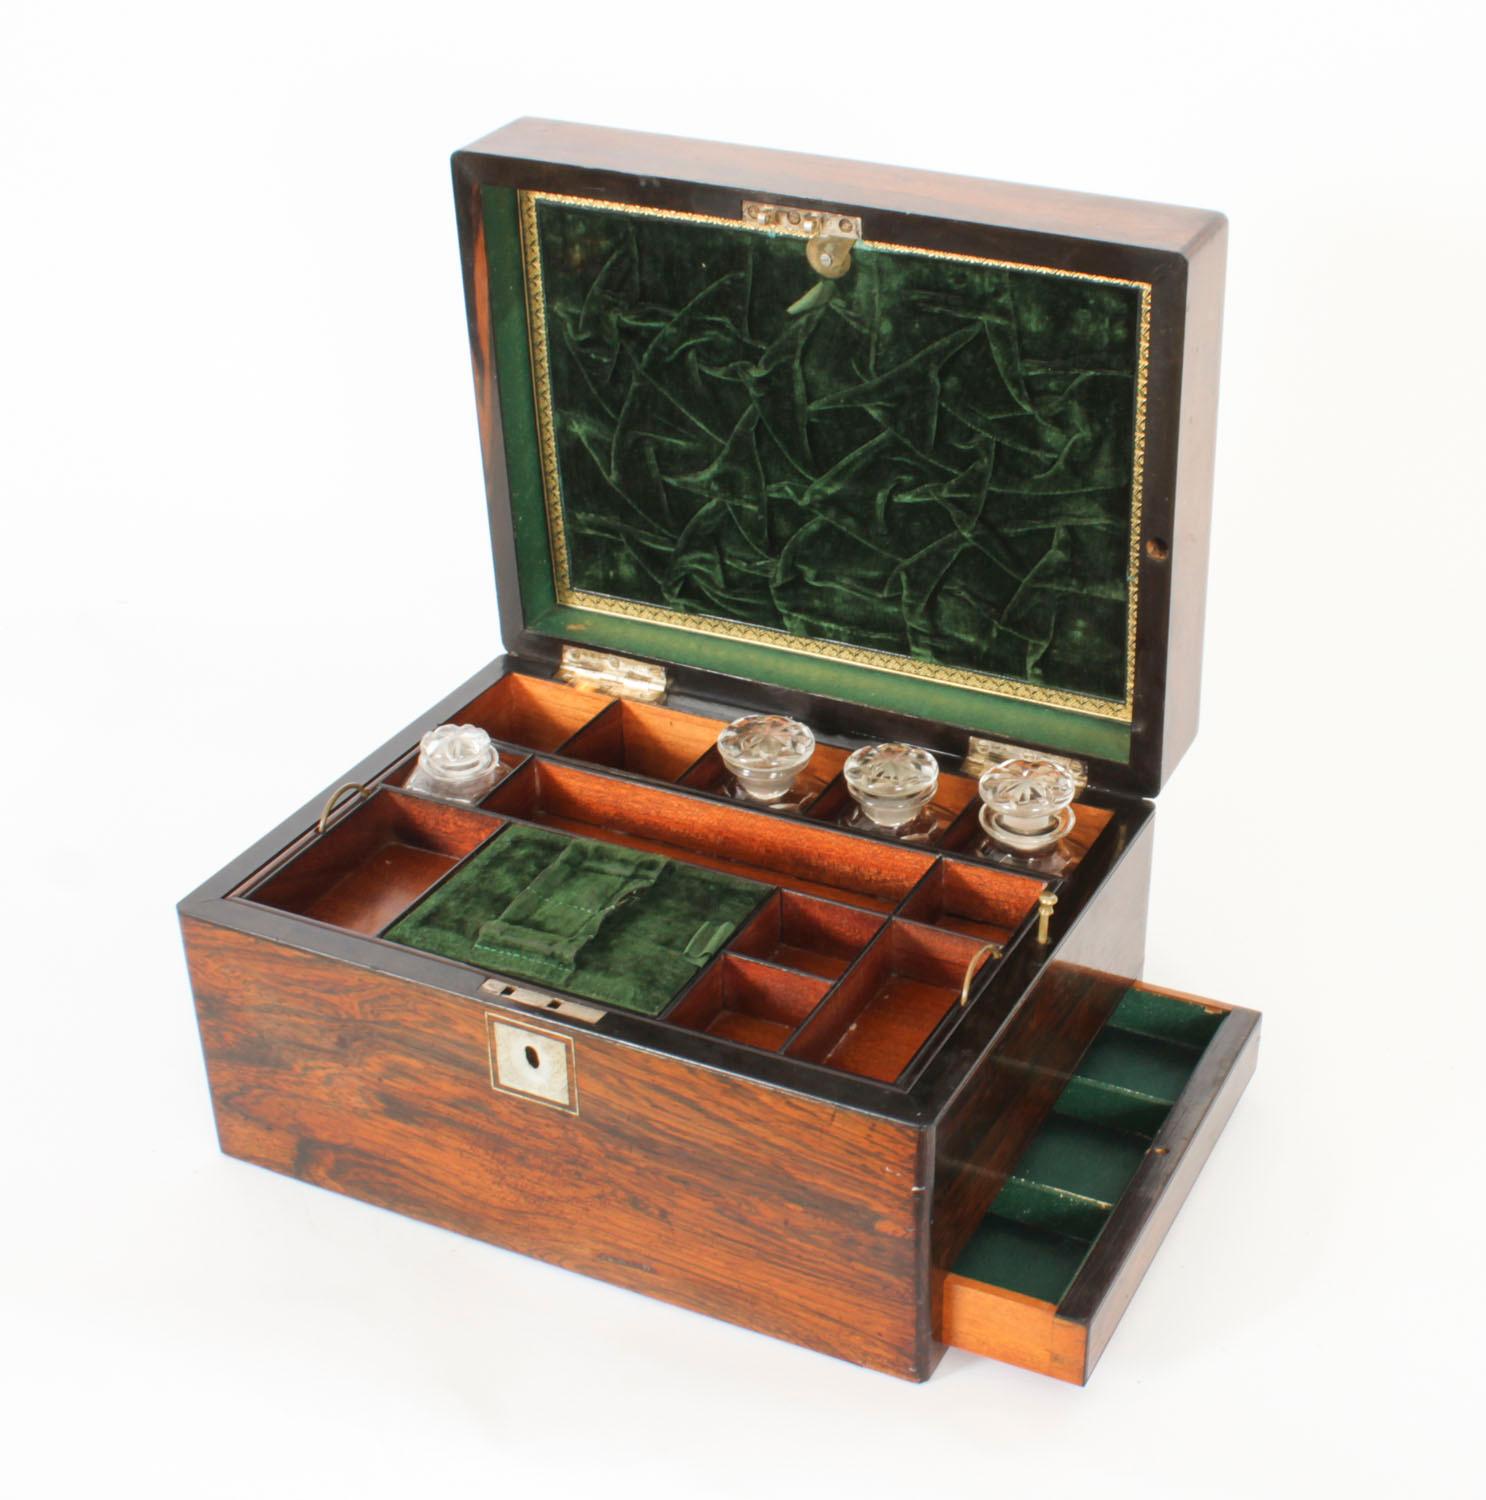 This is a magnificent antique Victorian Gonçalo Alves table top Vanity Box, circa 1860 in date.
 
 The fitted interior reveals a lift-out compartment tray, dressed with a green velvet centre and three scent bottles.

The top features a green leather